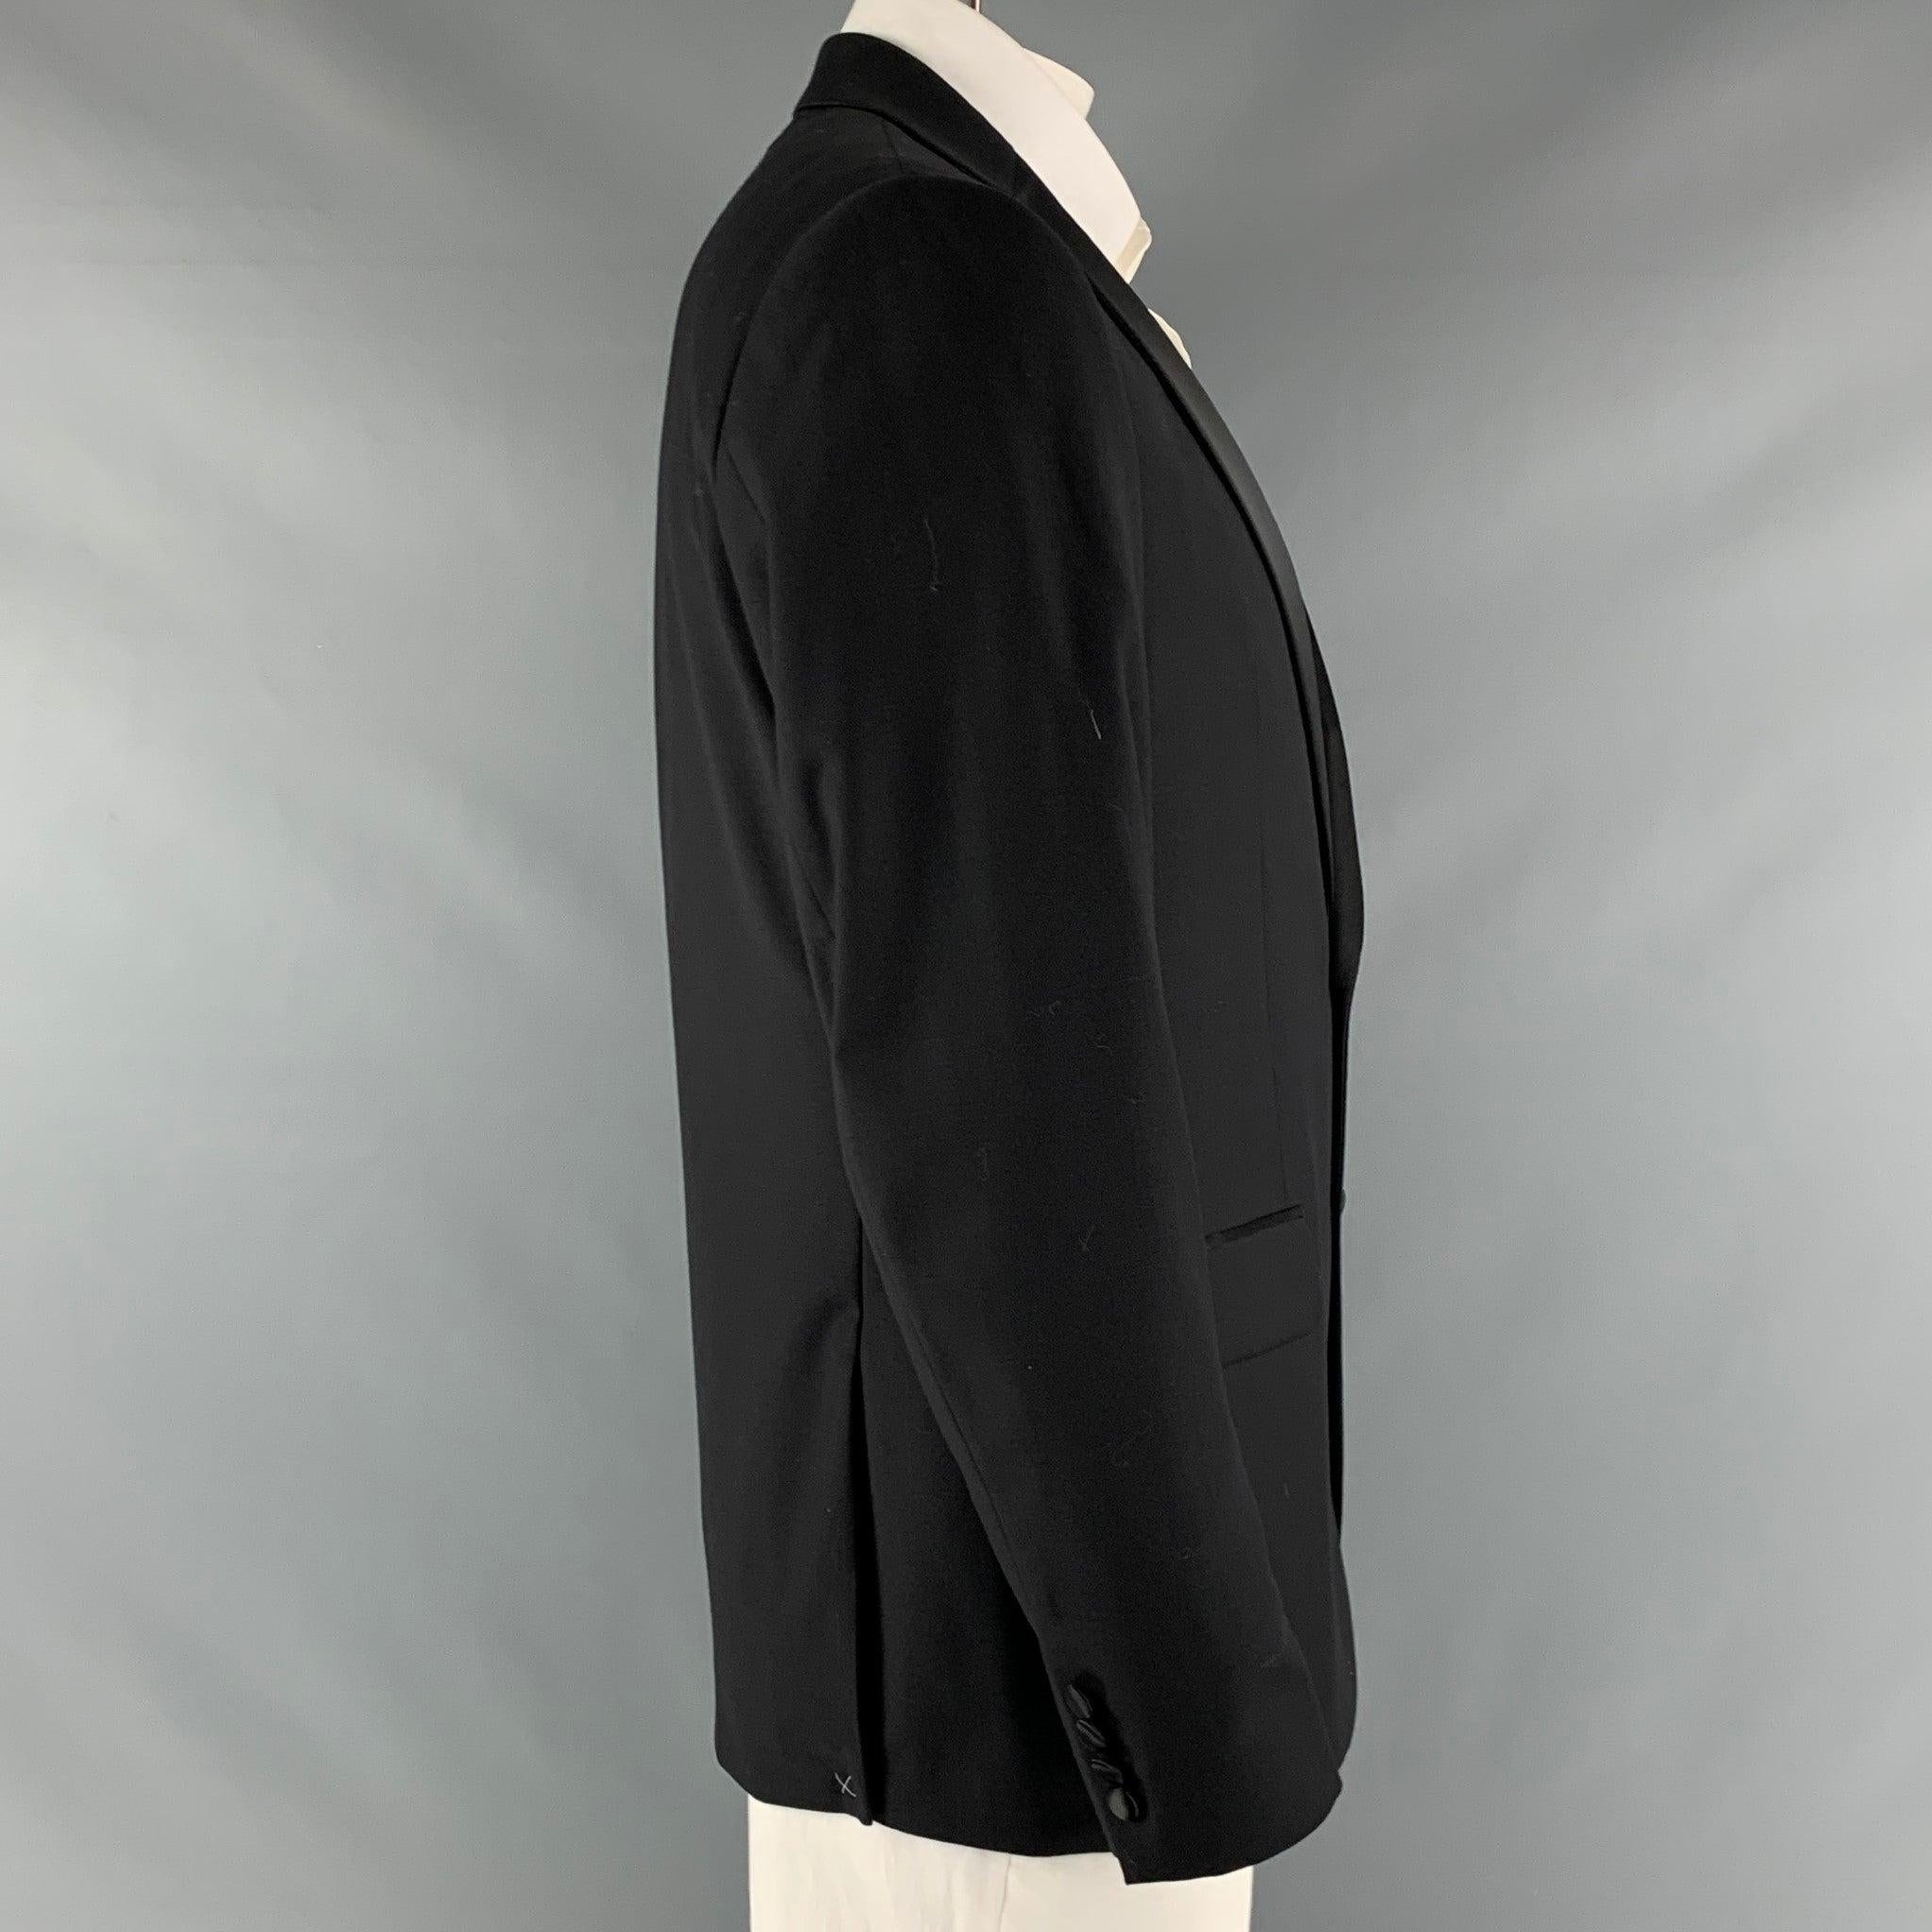 CALVIN KLEIN x SLIM FIT tuxedo sport coat comes in a black wool stretch material with a full liner and includes a single breasted, double button closure, notch lapel and double back vent.New with Tags. 

Marked:   42 R 

Measurements: 
 
Shoulder: